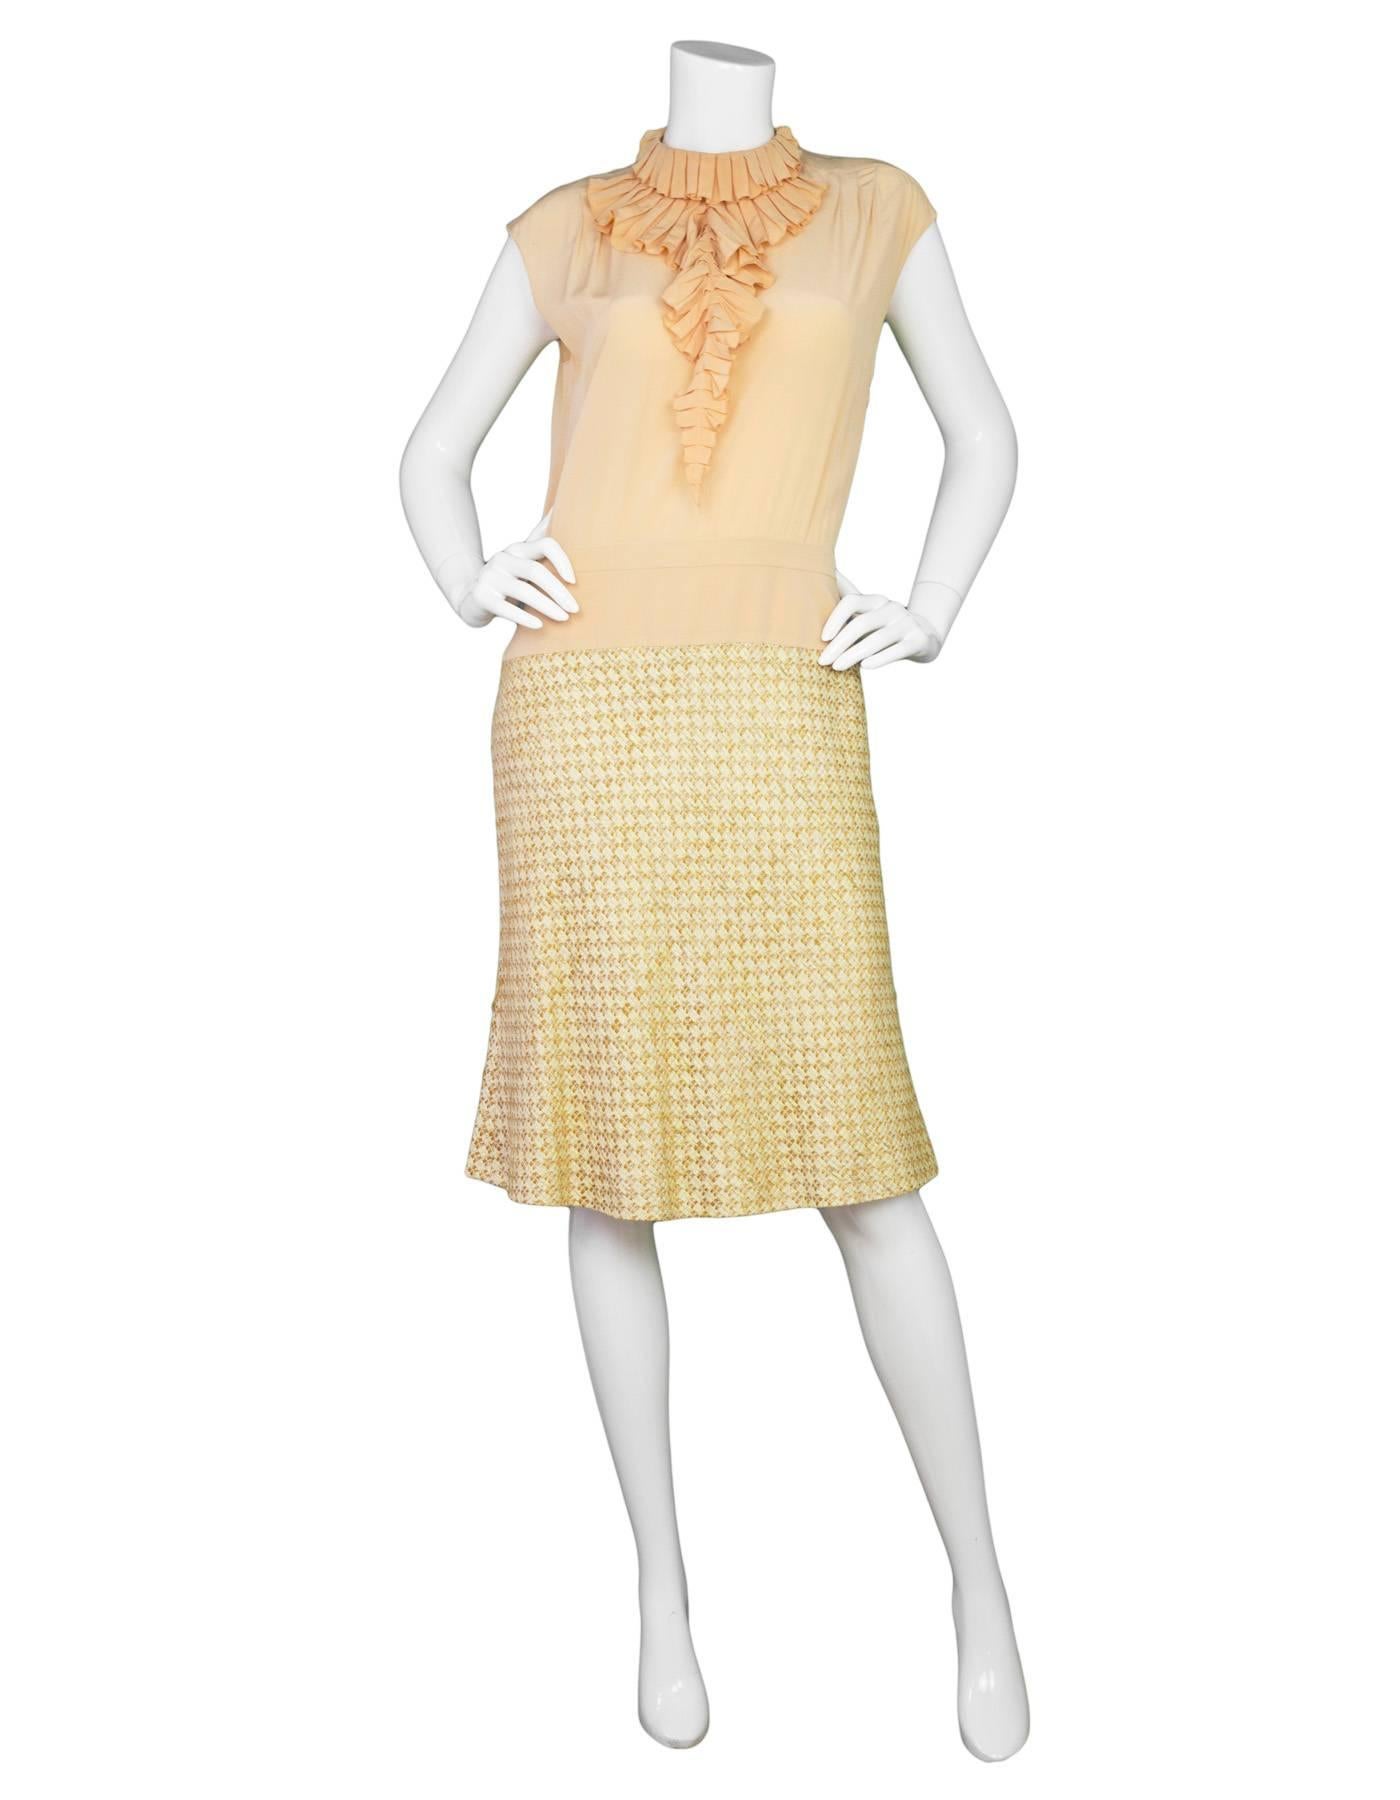 Chanel Peach Silk & Tweed Sleeveless Dress
Features removable ruffle neck tie

Made In: France
Year of Production: 2001
Color: Peach
Materials: 72% Rayon, 28% Cotton 
Lining: 100% Silk
Closure/Opening: Zipper at the side of the dress as well as